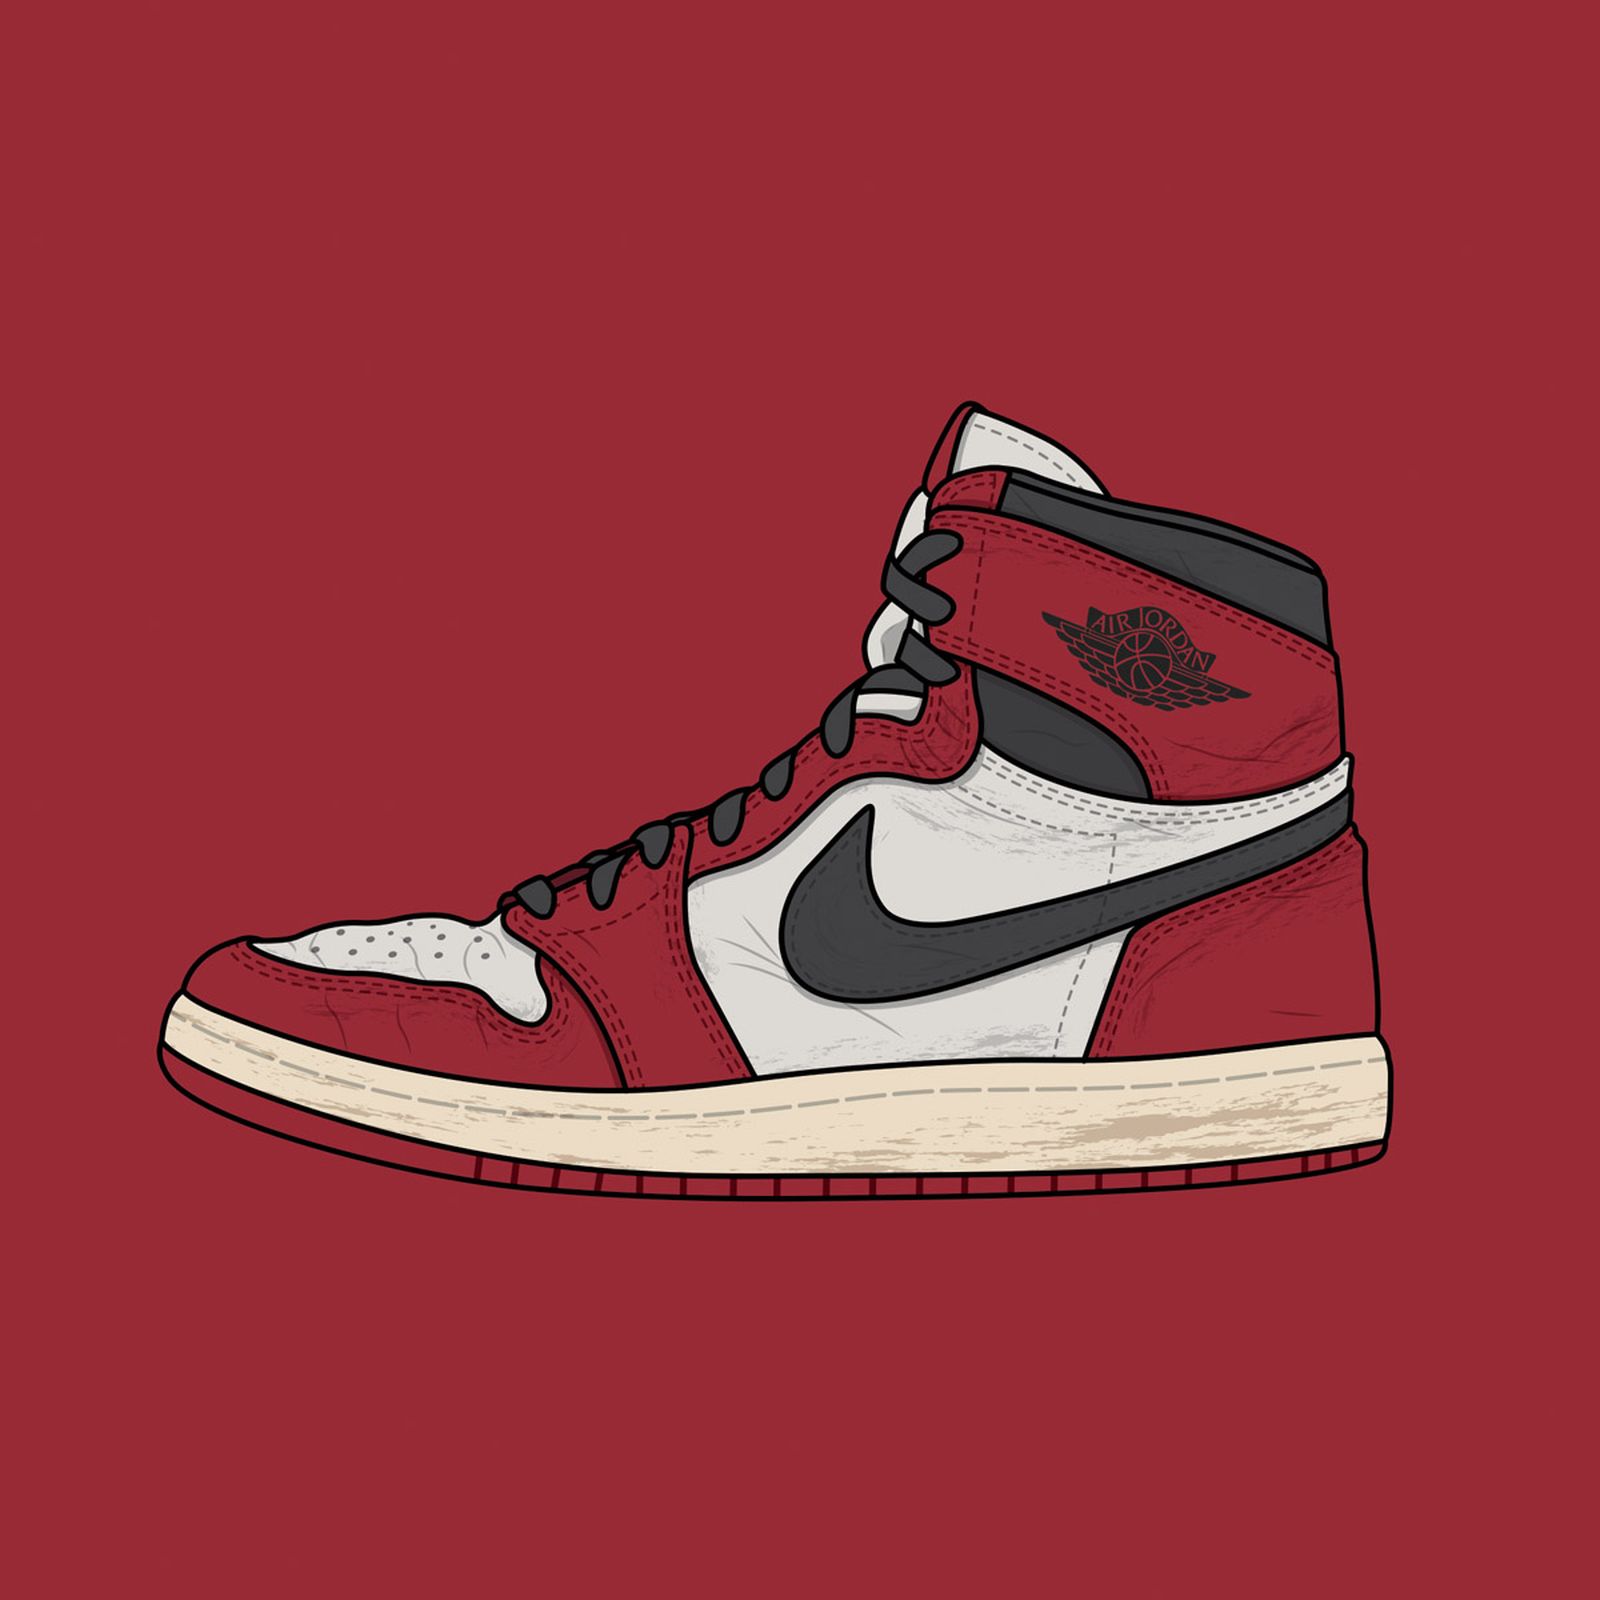 Living room Conversational With other bands Nike Air Jordan 1 Resell Values: A Full Ranking